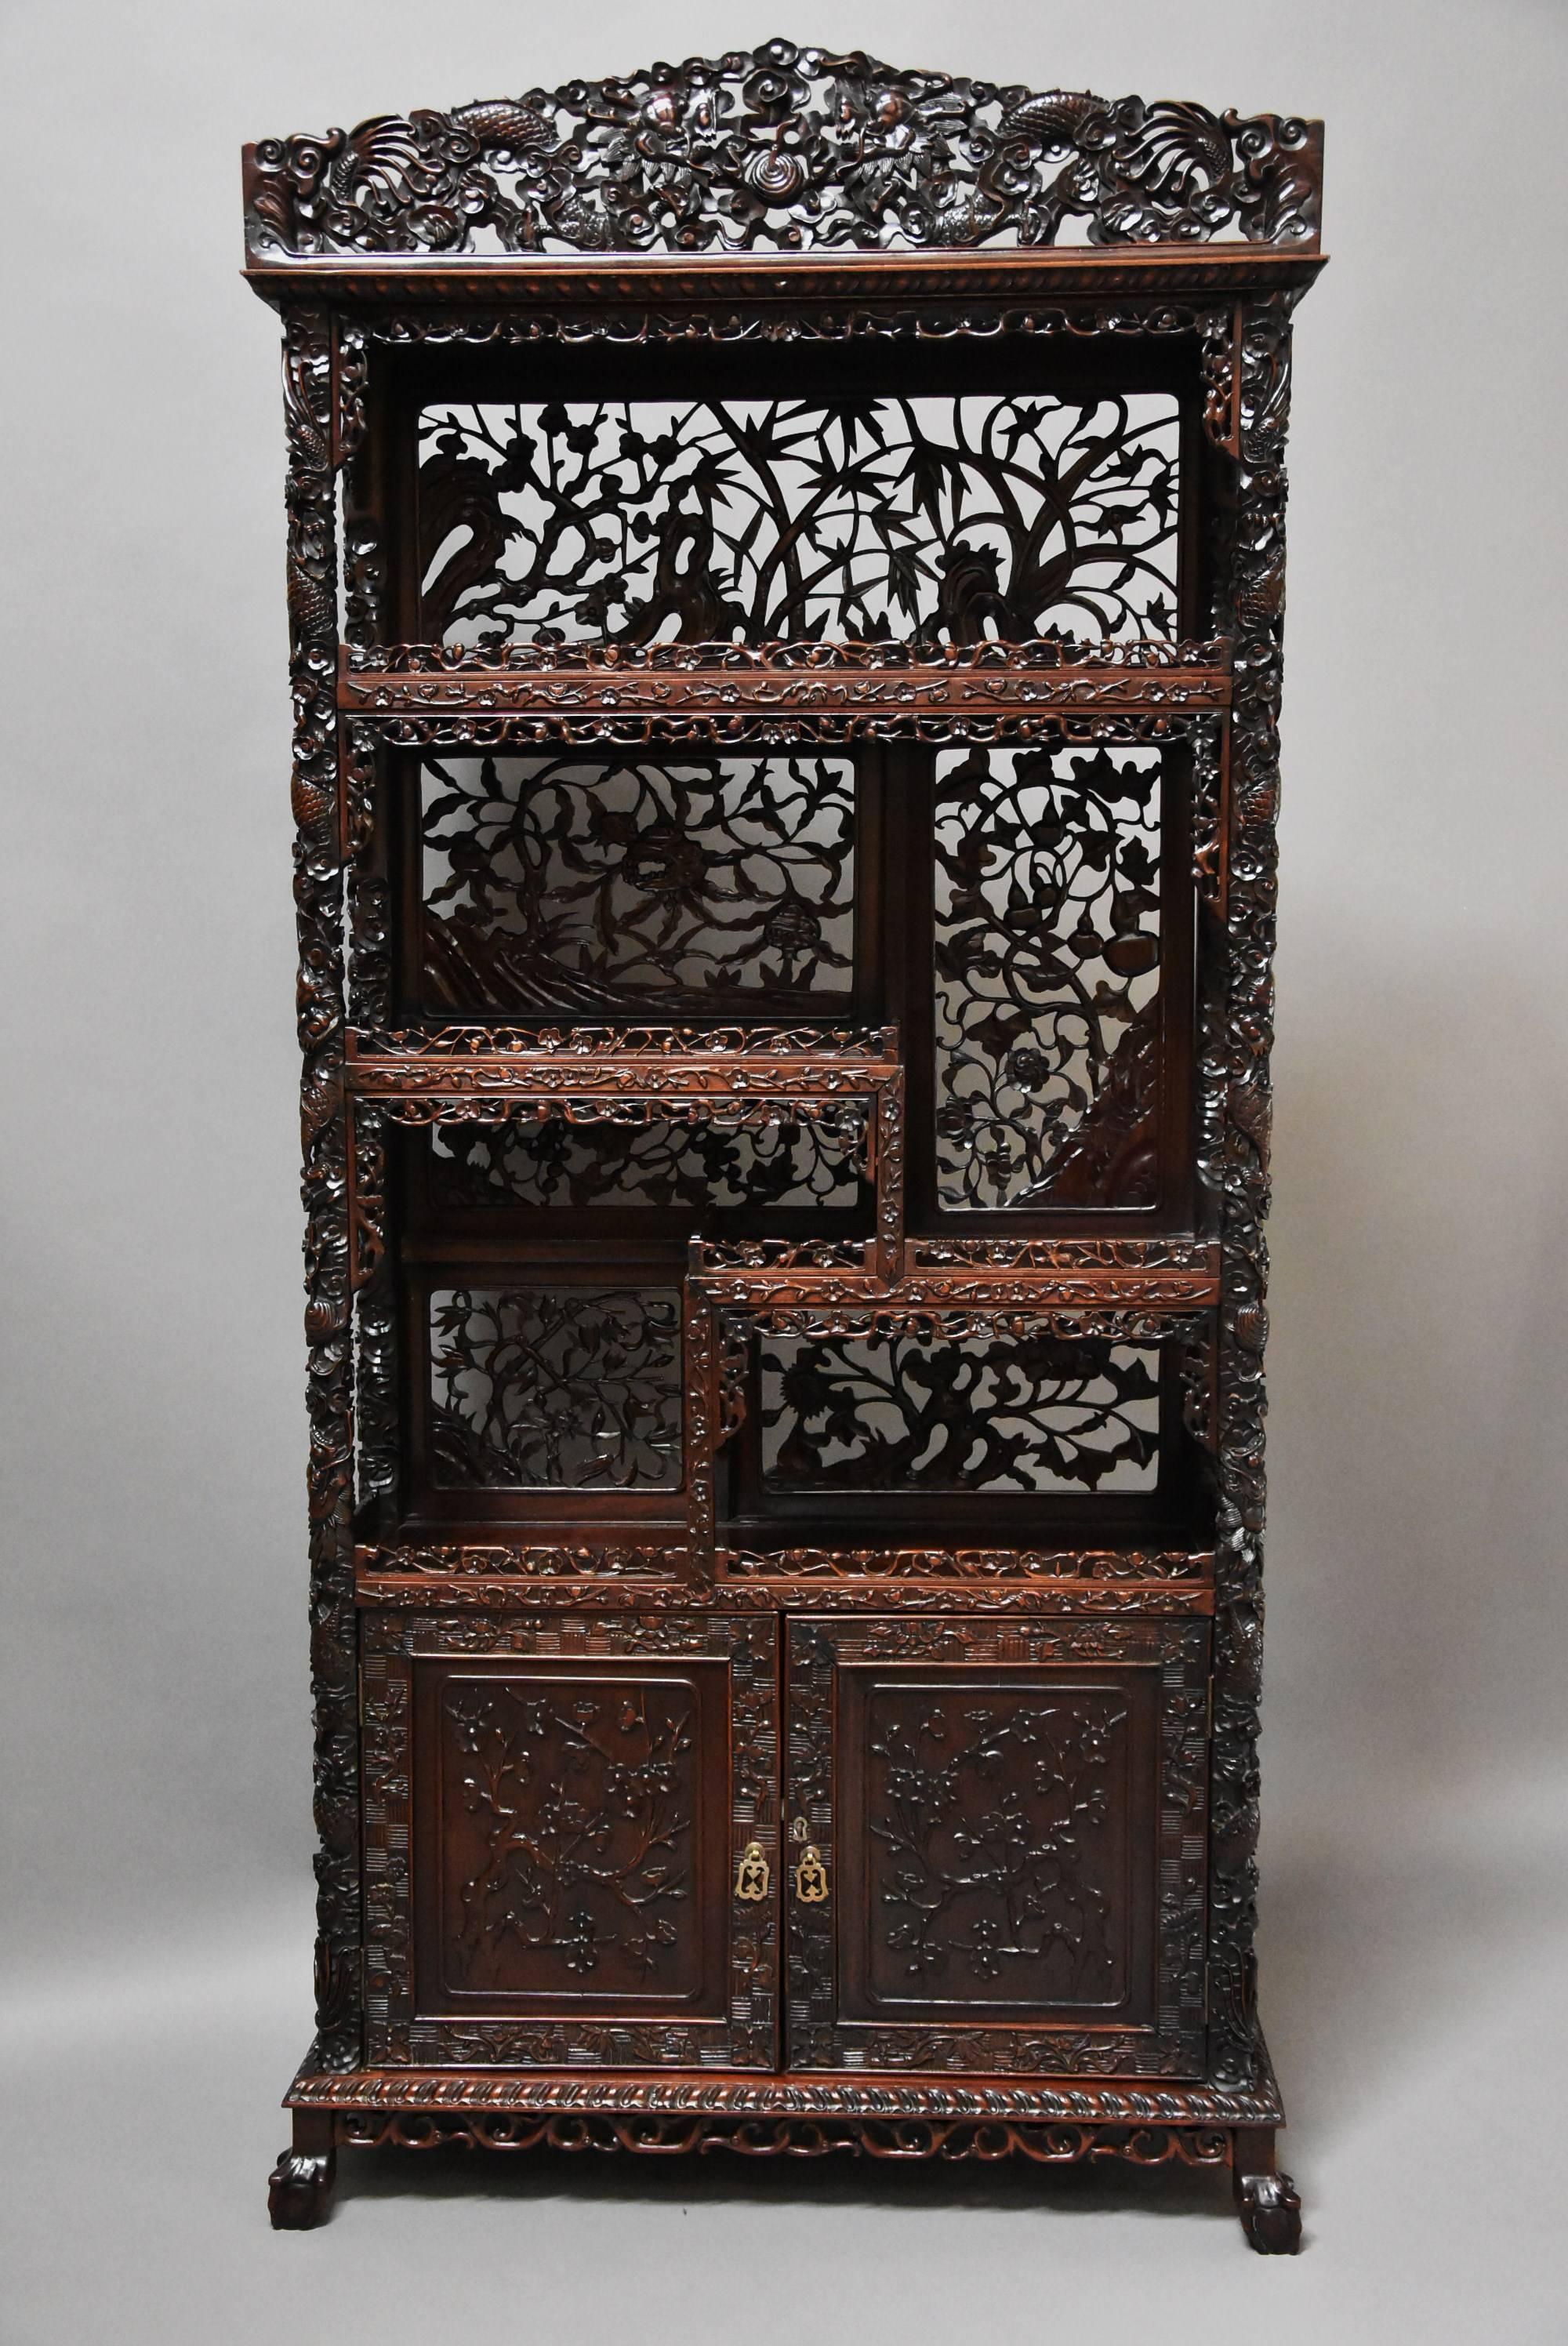 A late 19th century Chinese superb quality profusely carved padouk (or Chinese hardwood) display cabinet. 

This cabinet consists of a superbly carved and pierced shaped pediment to the top with carved Chinese symbols including dragons and exotic